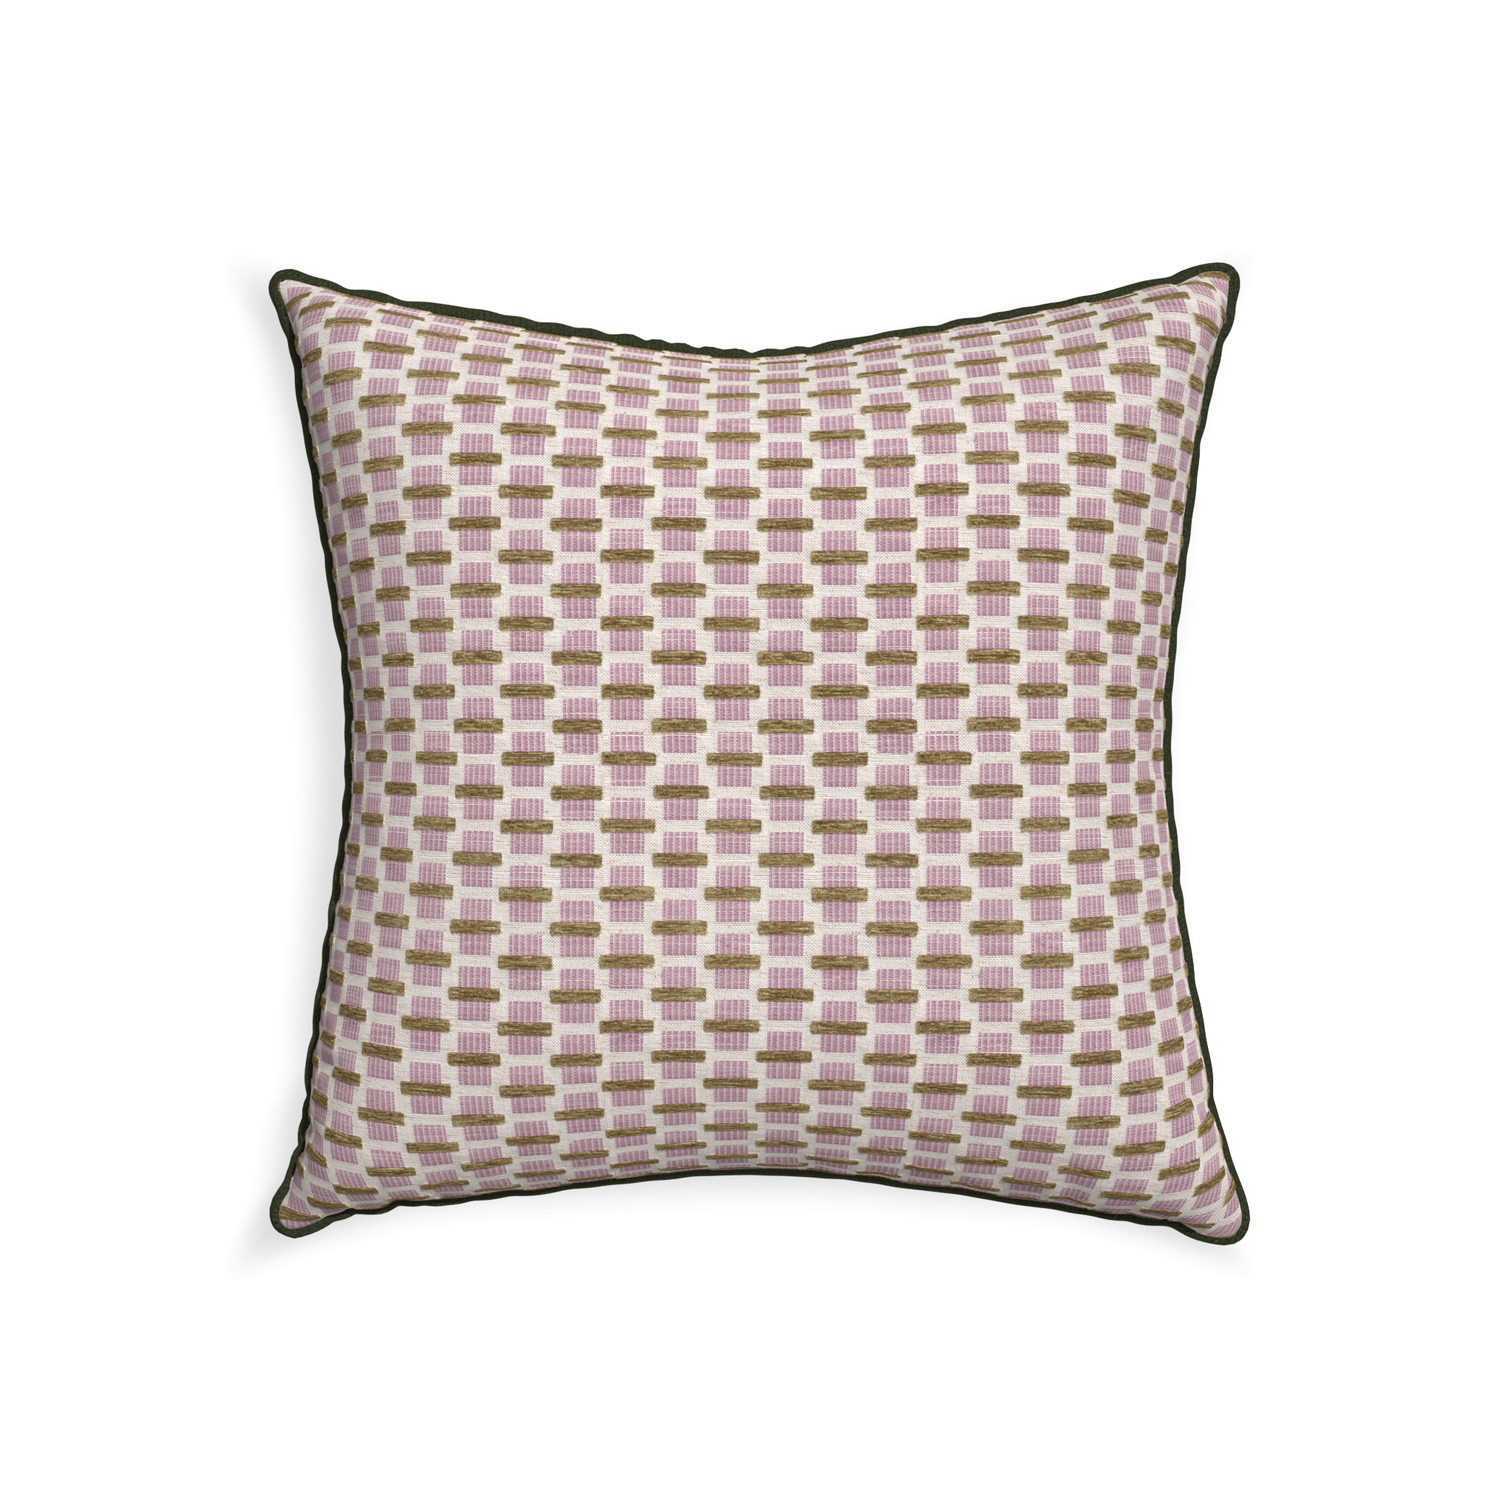 22-square willow orchid custom pink geometric chenillepillow with f piping on white background